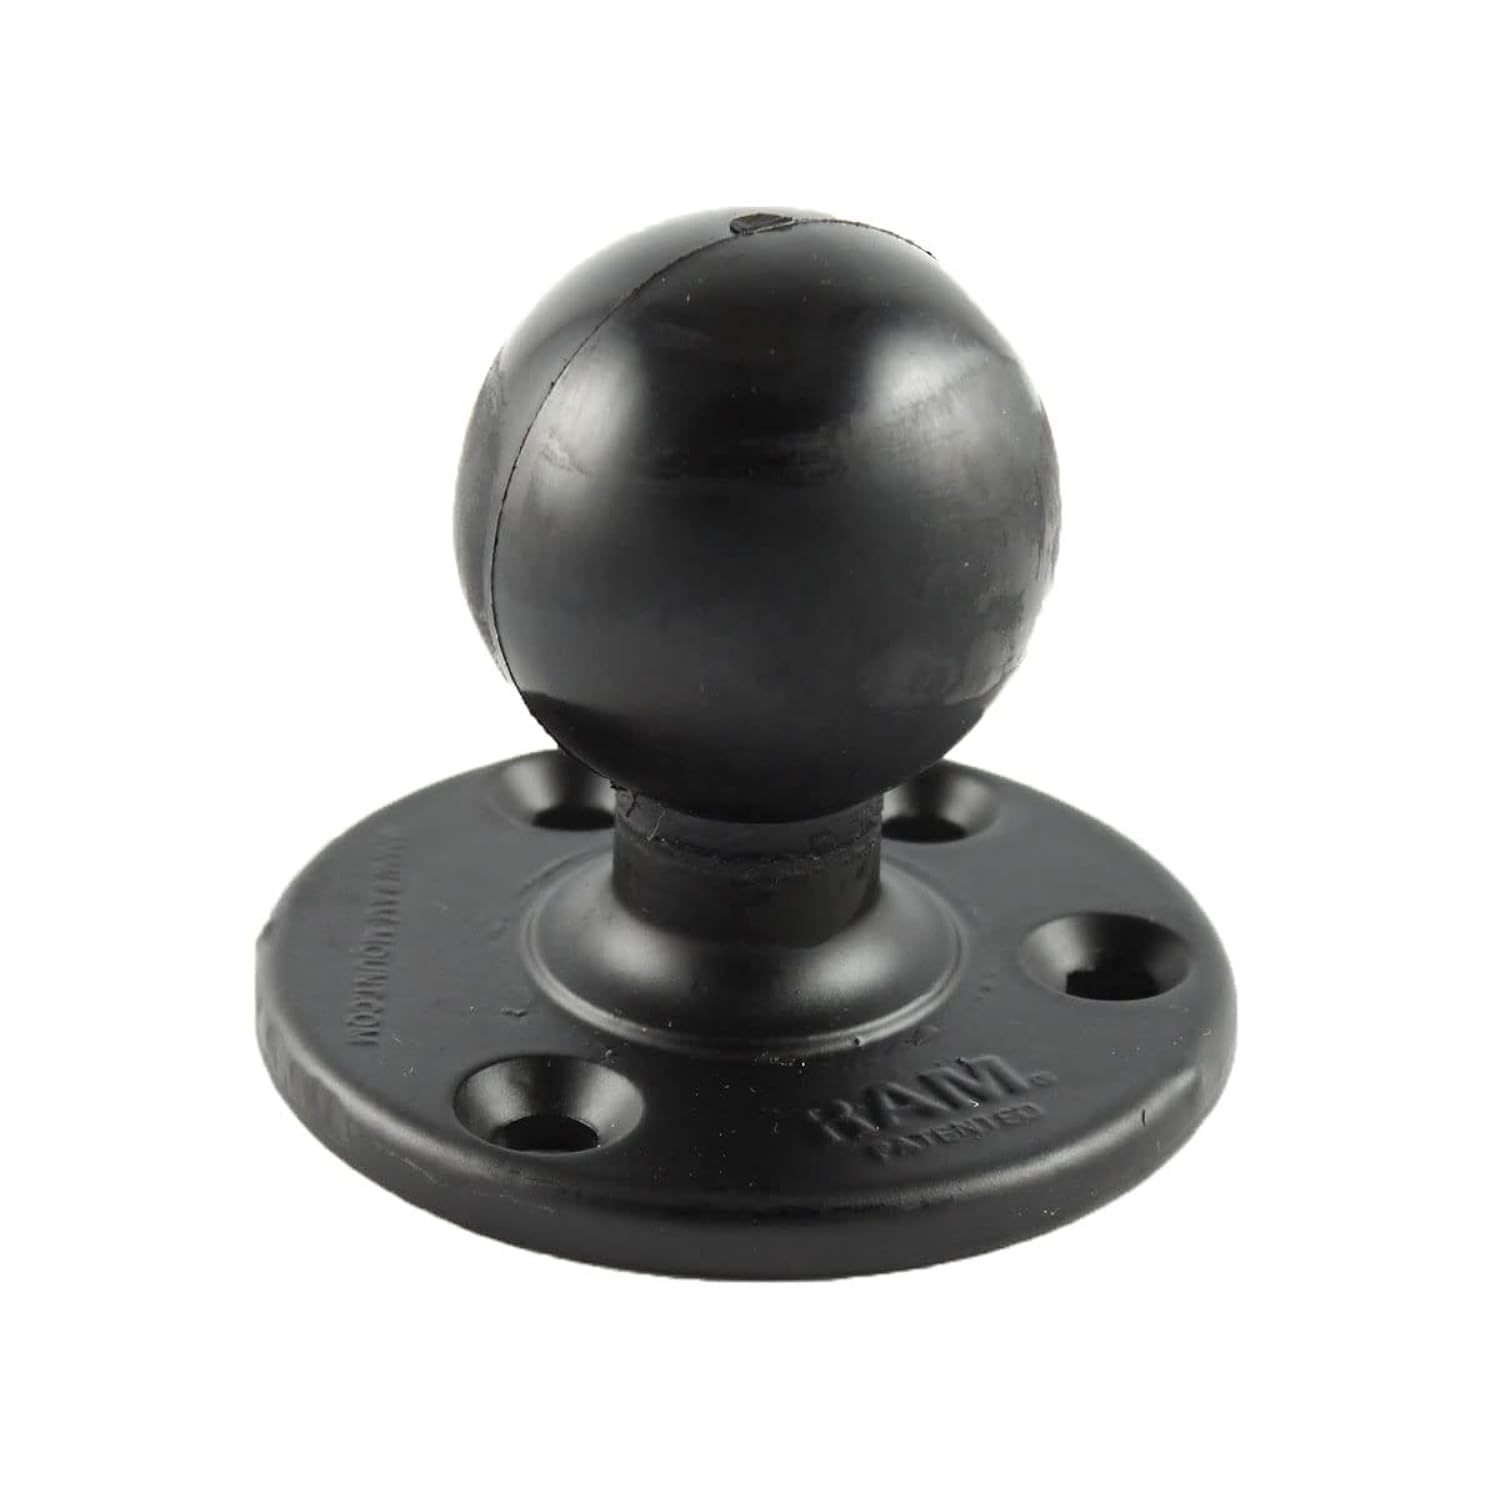 Primary image for RAM Mounts Large Round Plate with Ball RAM-D-202U with D Size 2.25" Ball